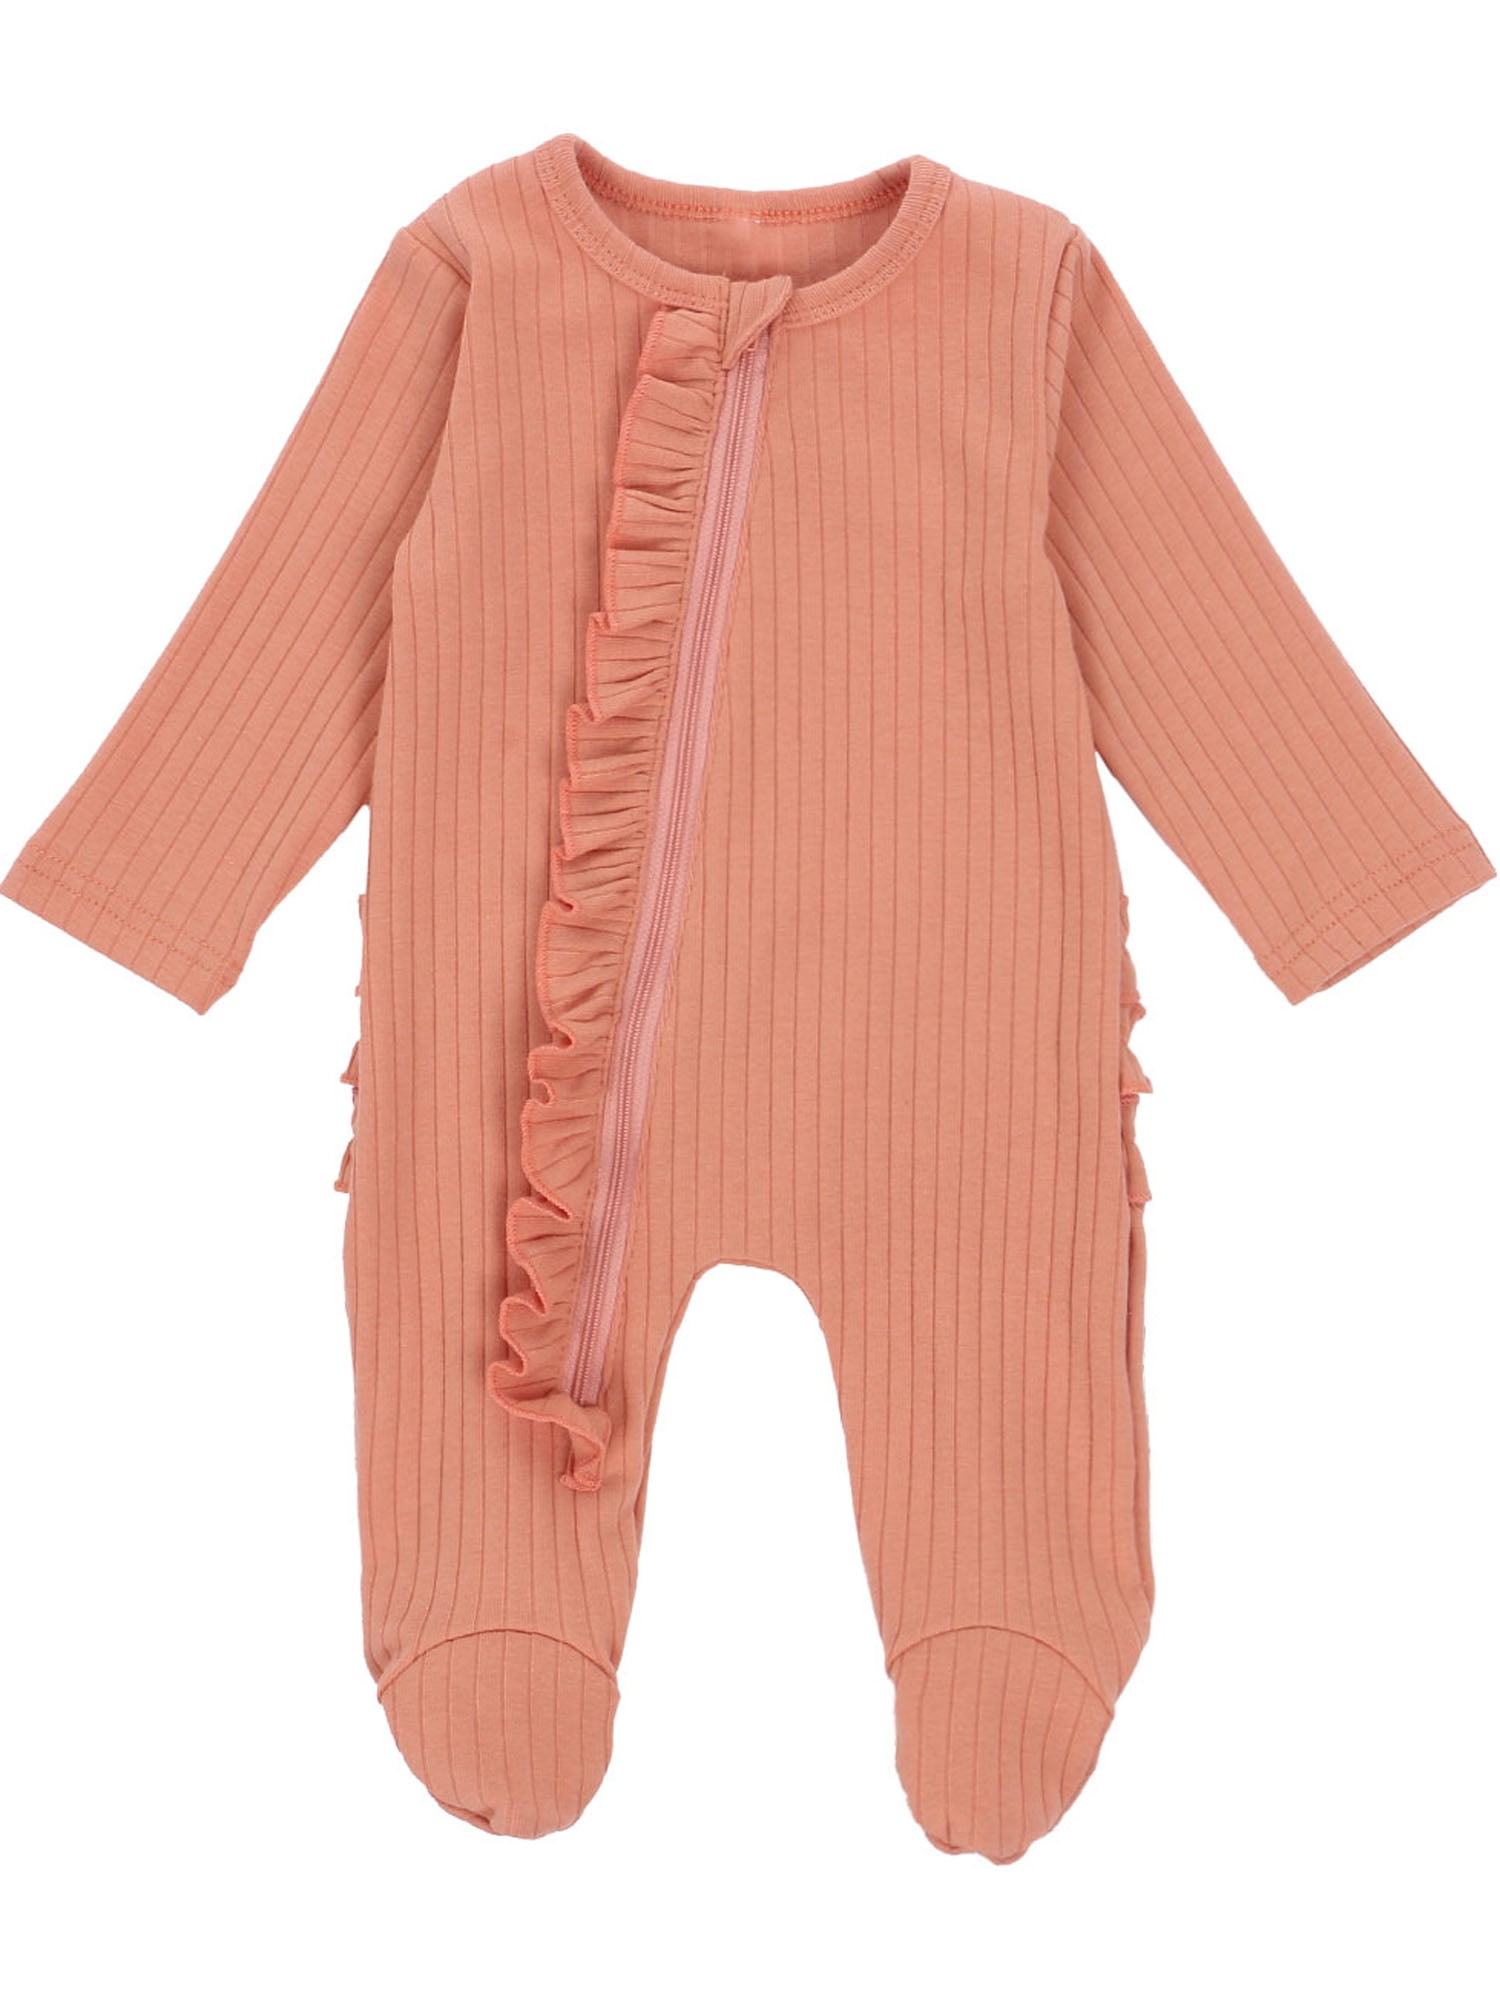 Infant Baby Boys Girls Clothes Knitted Romper Jumpsuit Bodysuit One-Piece Pajamas Ribbed Outfit Clothing